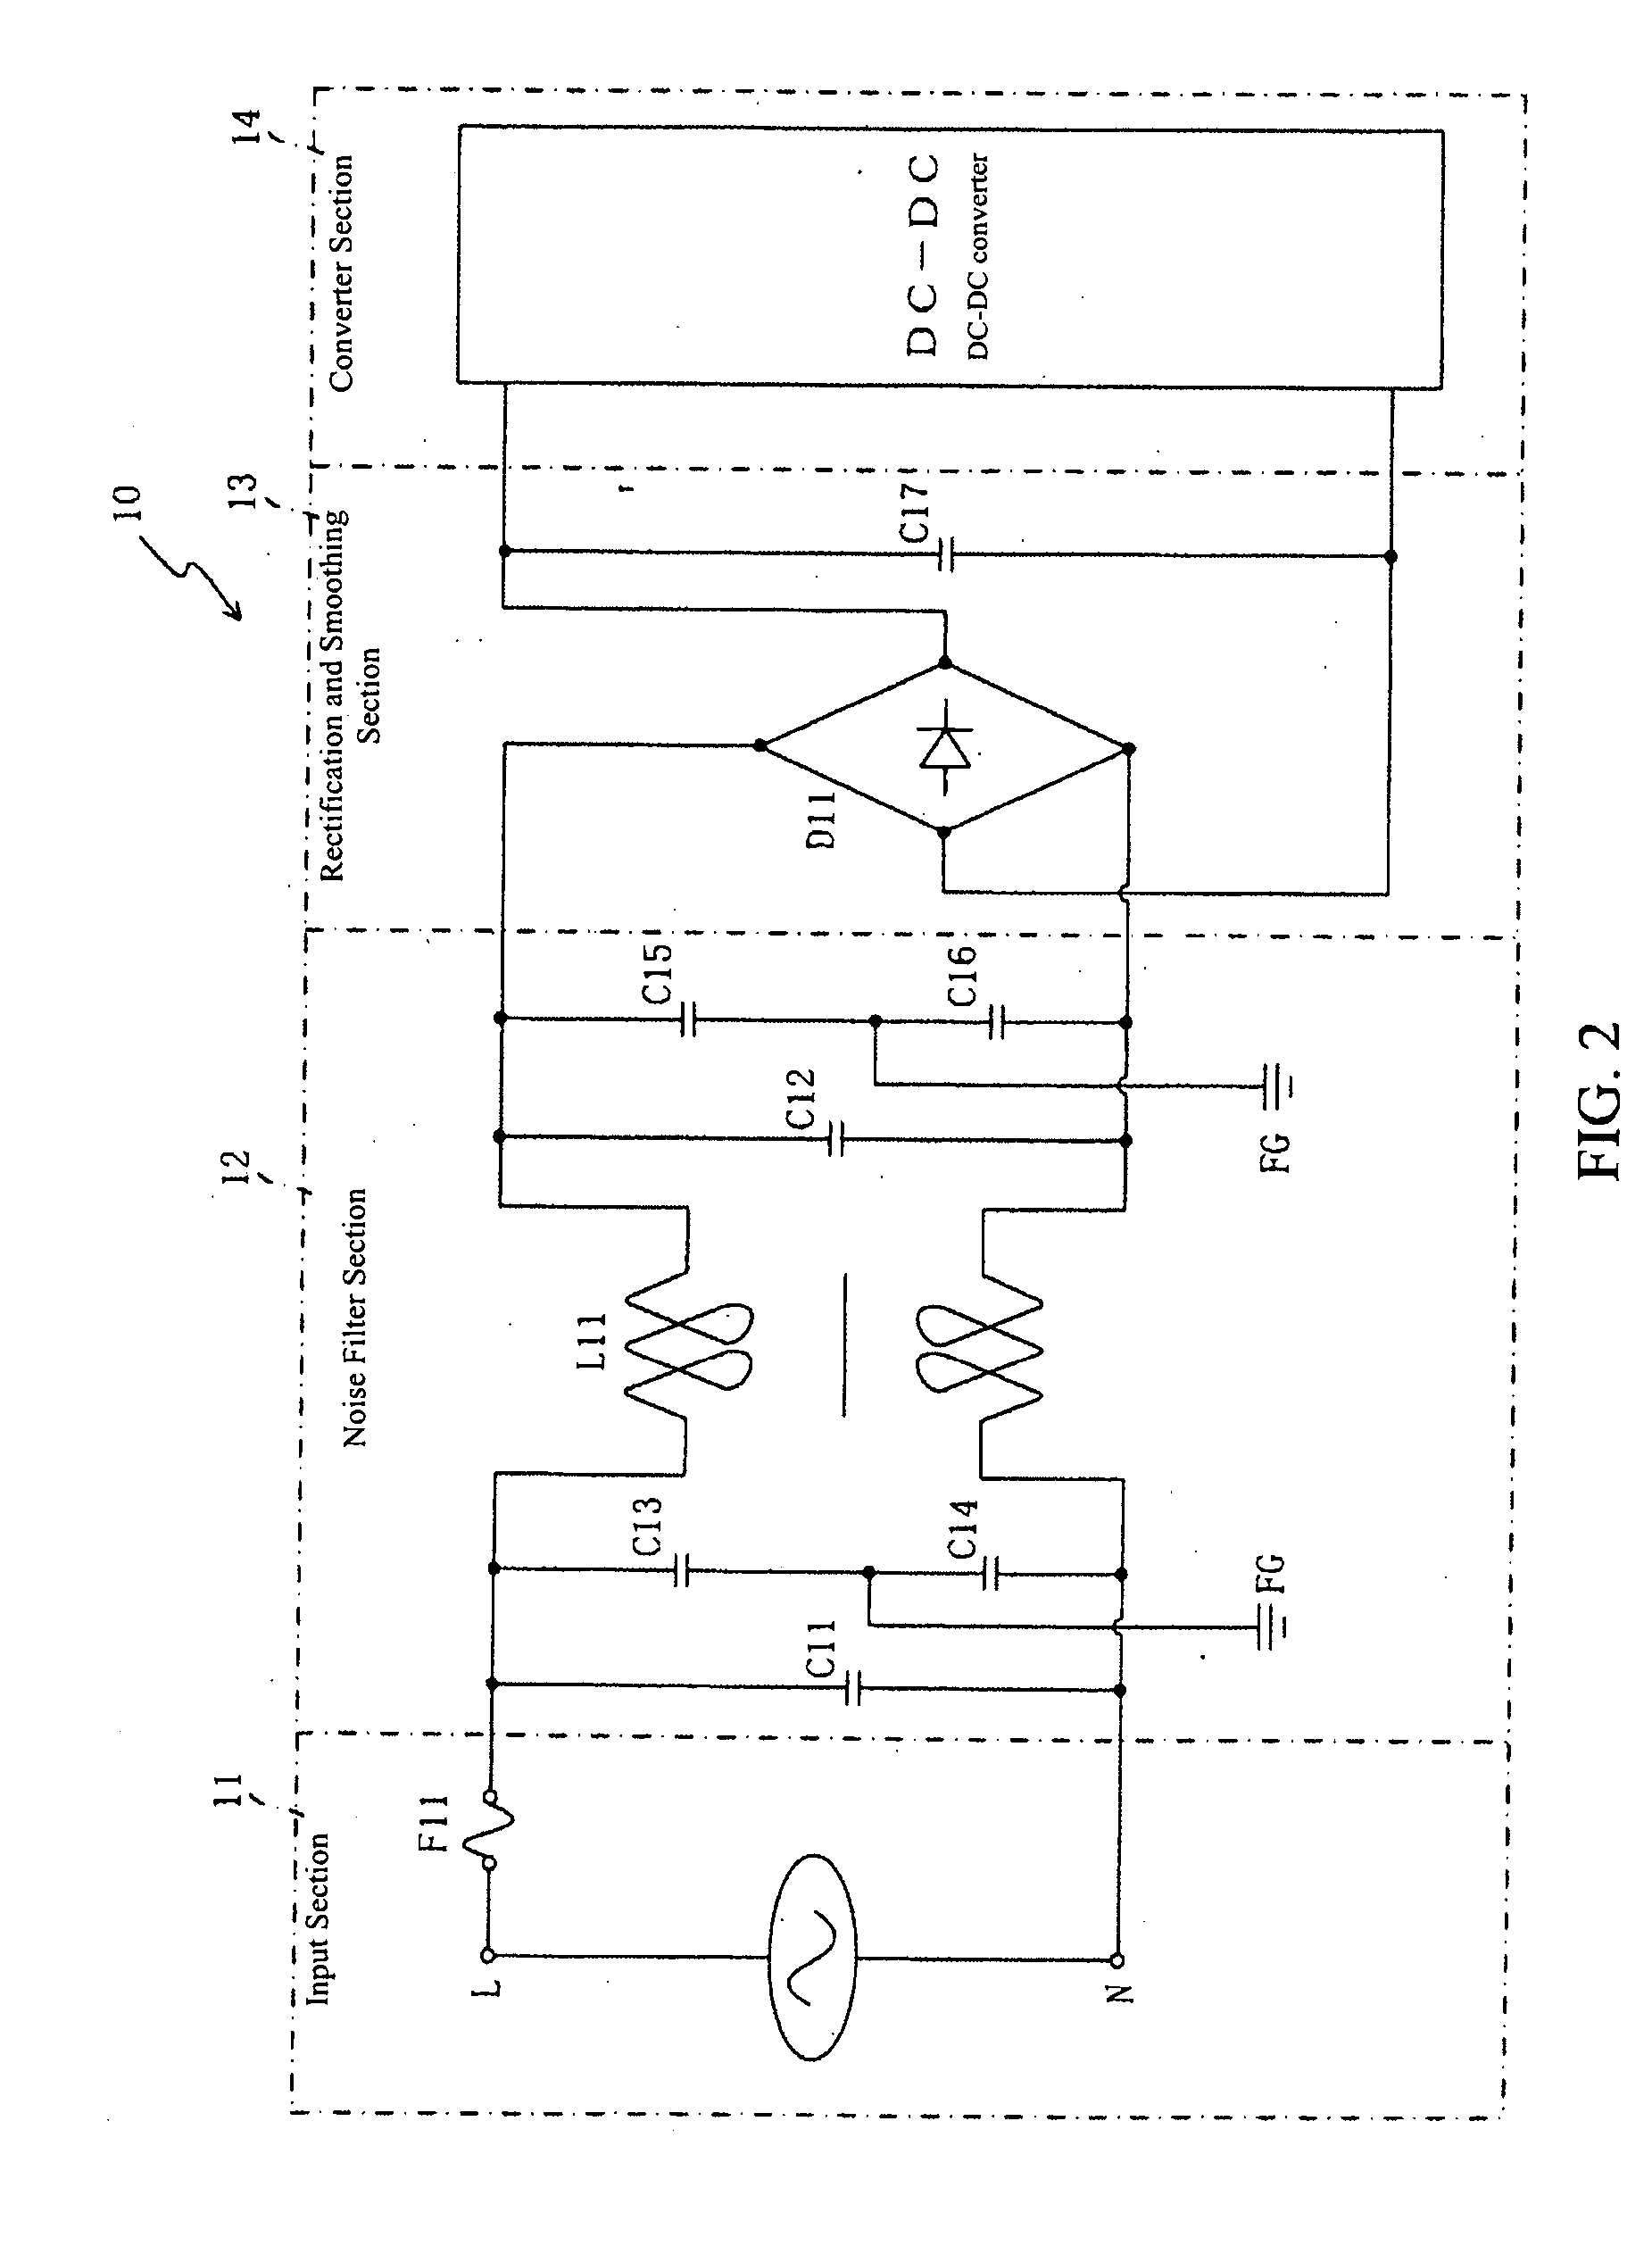 Switching power supply apparatus and method